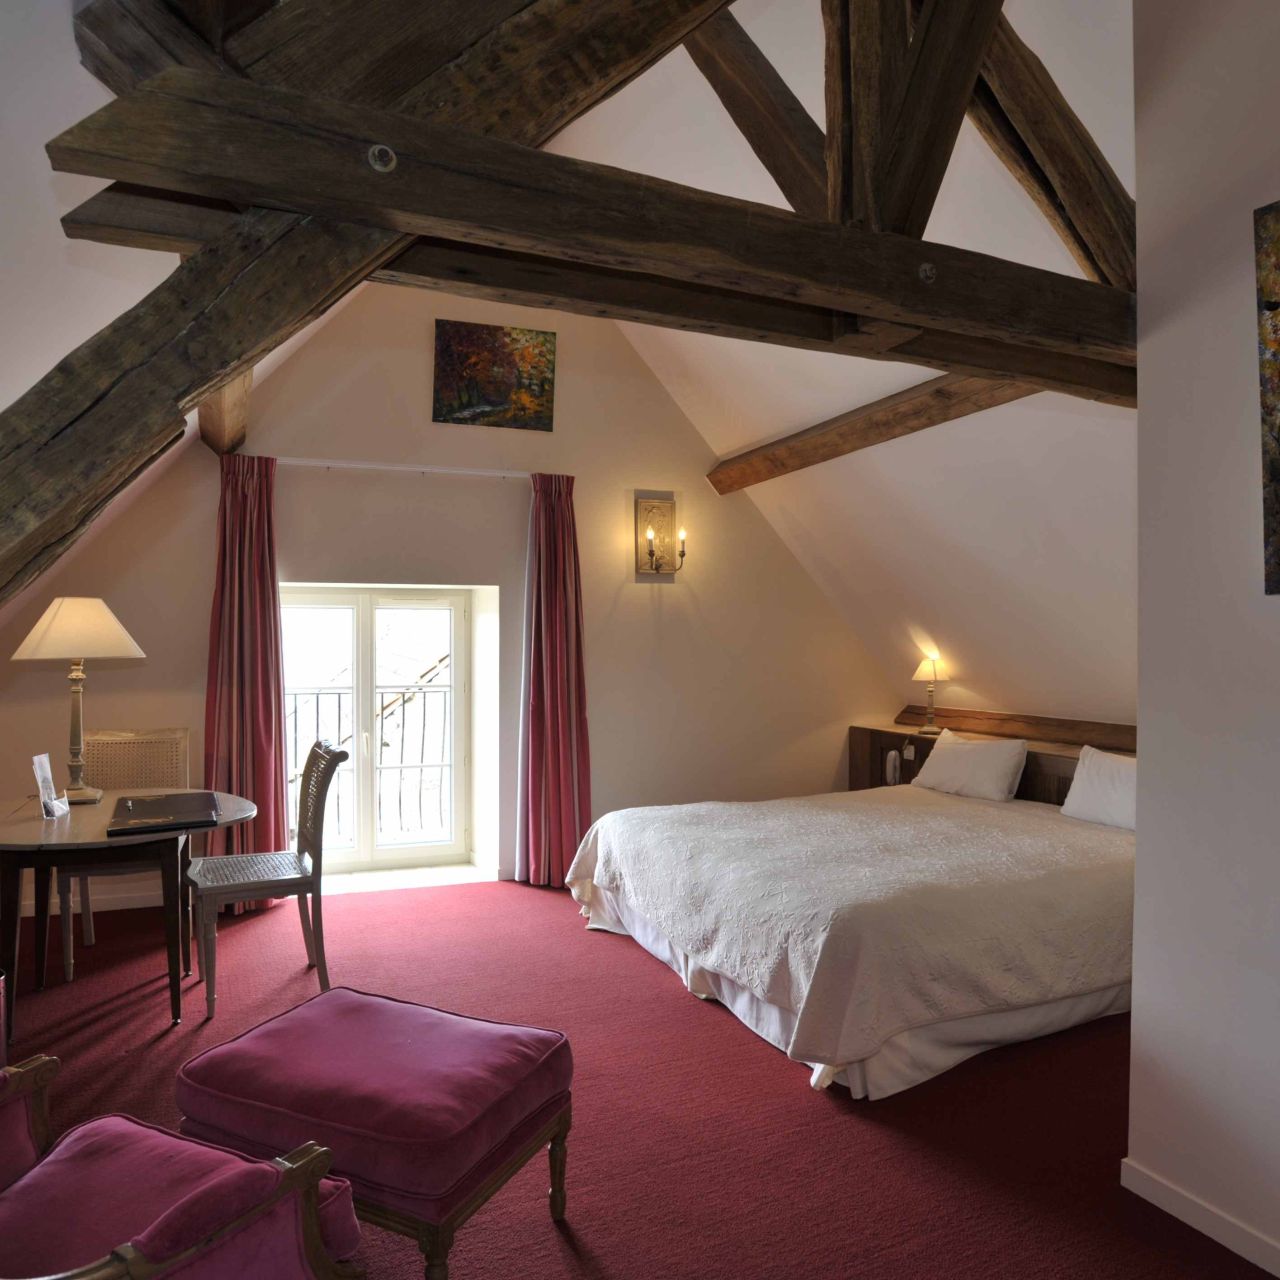 Hotel Le Marius Logis - Champagne-Ardenne - Great prices at HOTEL INFO